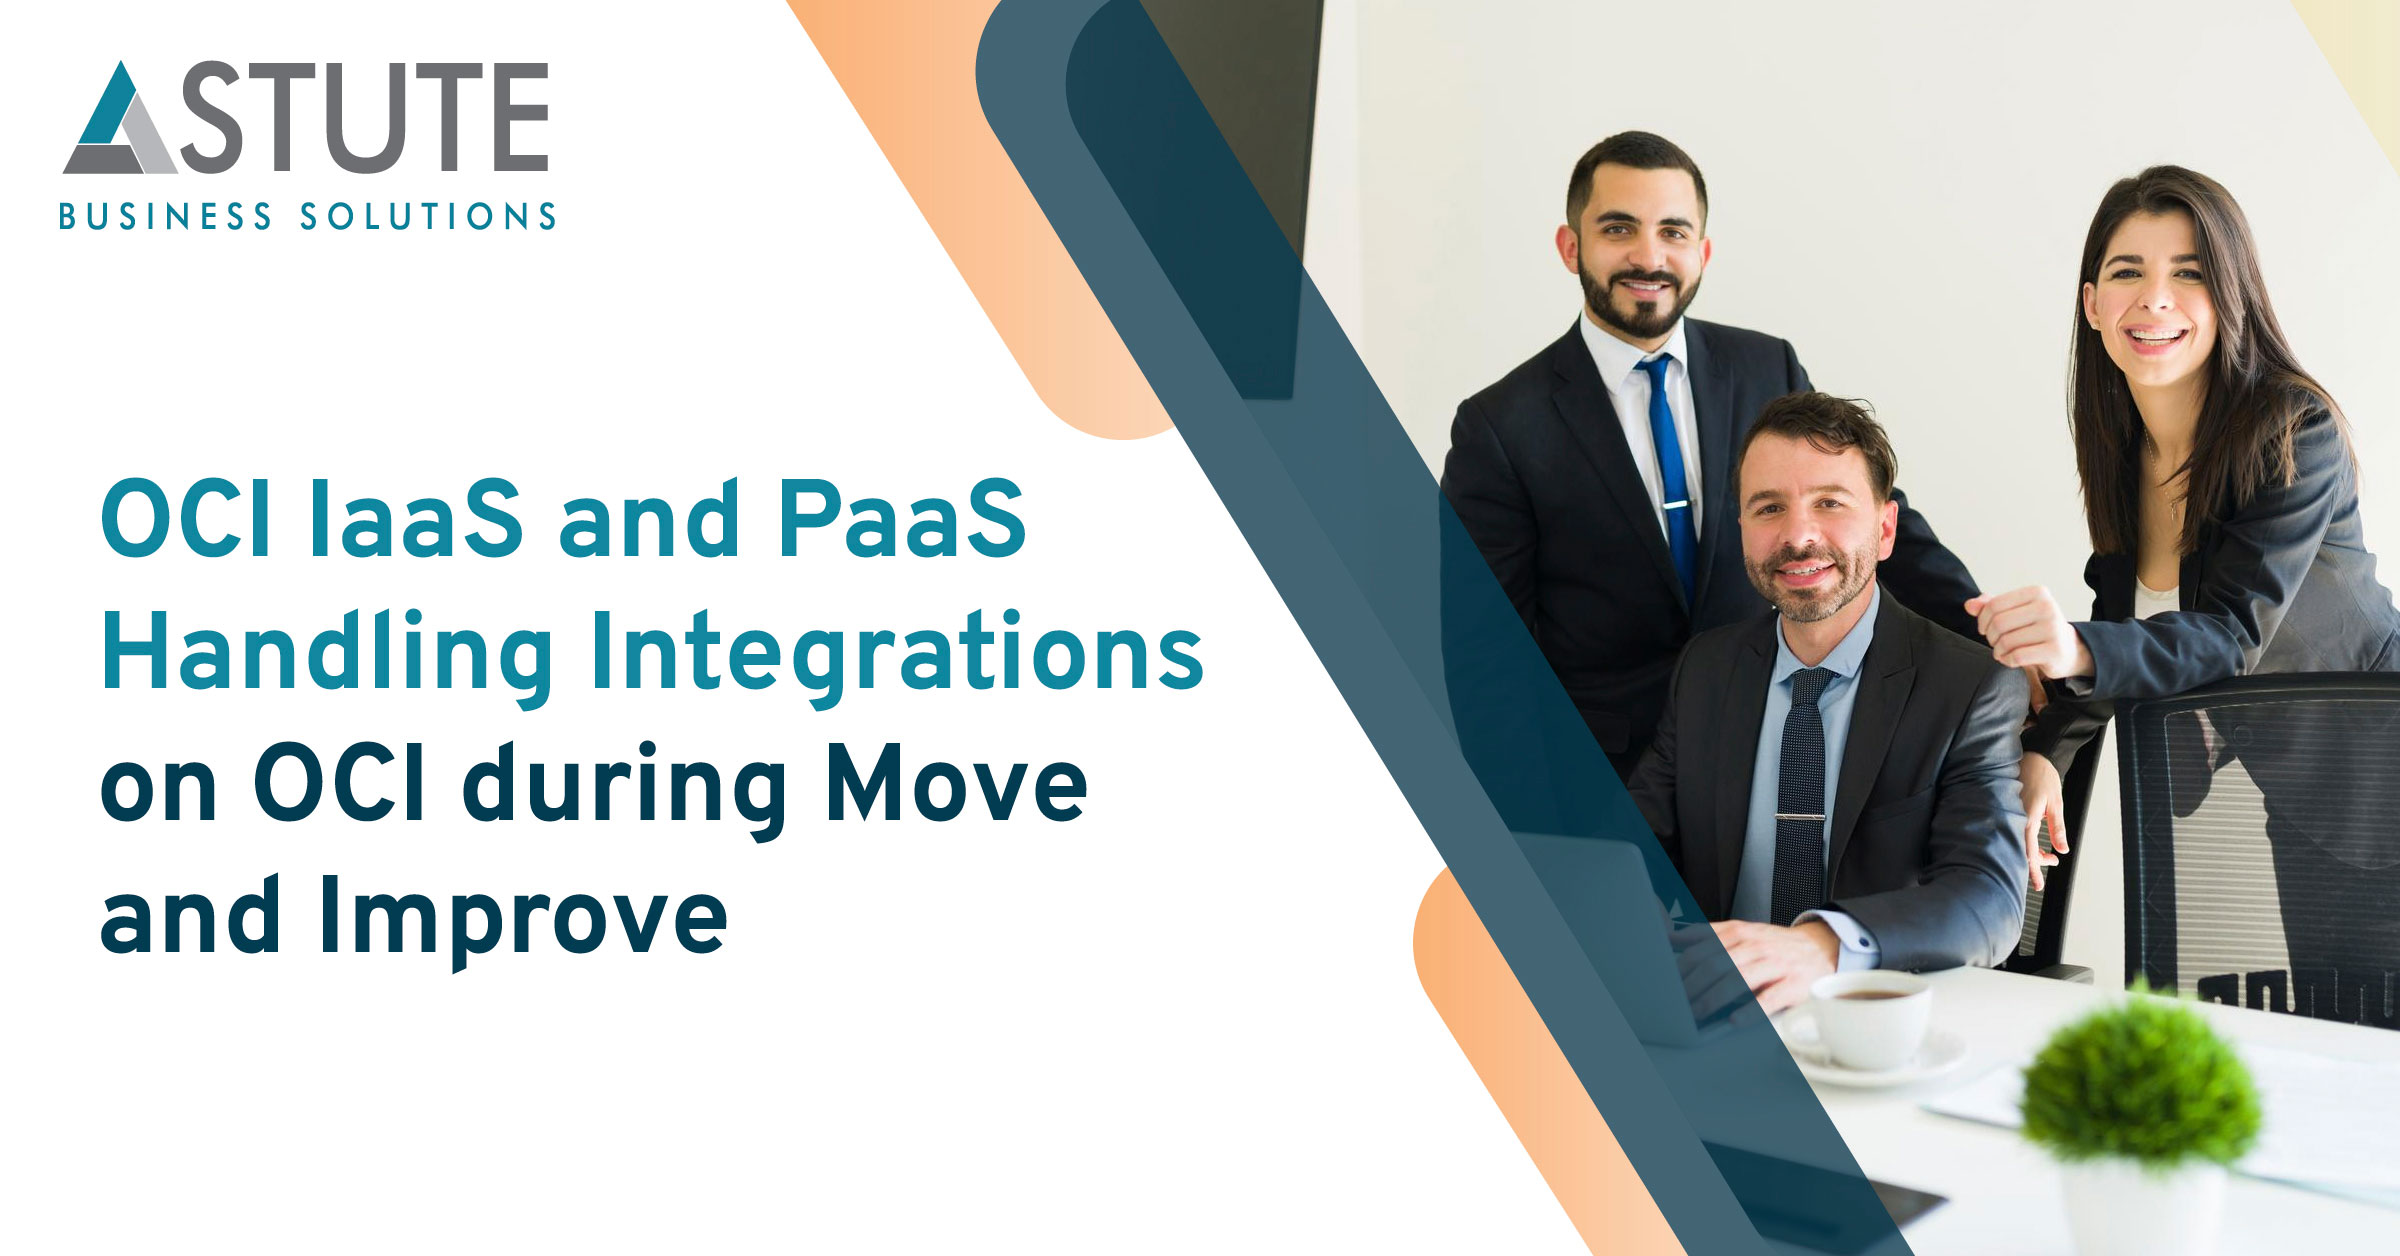 OCI IaaS and PaaS: Handling integrations on OCI during Move and Improve